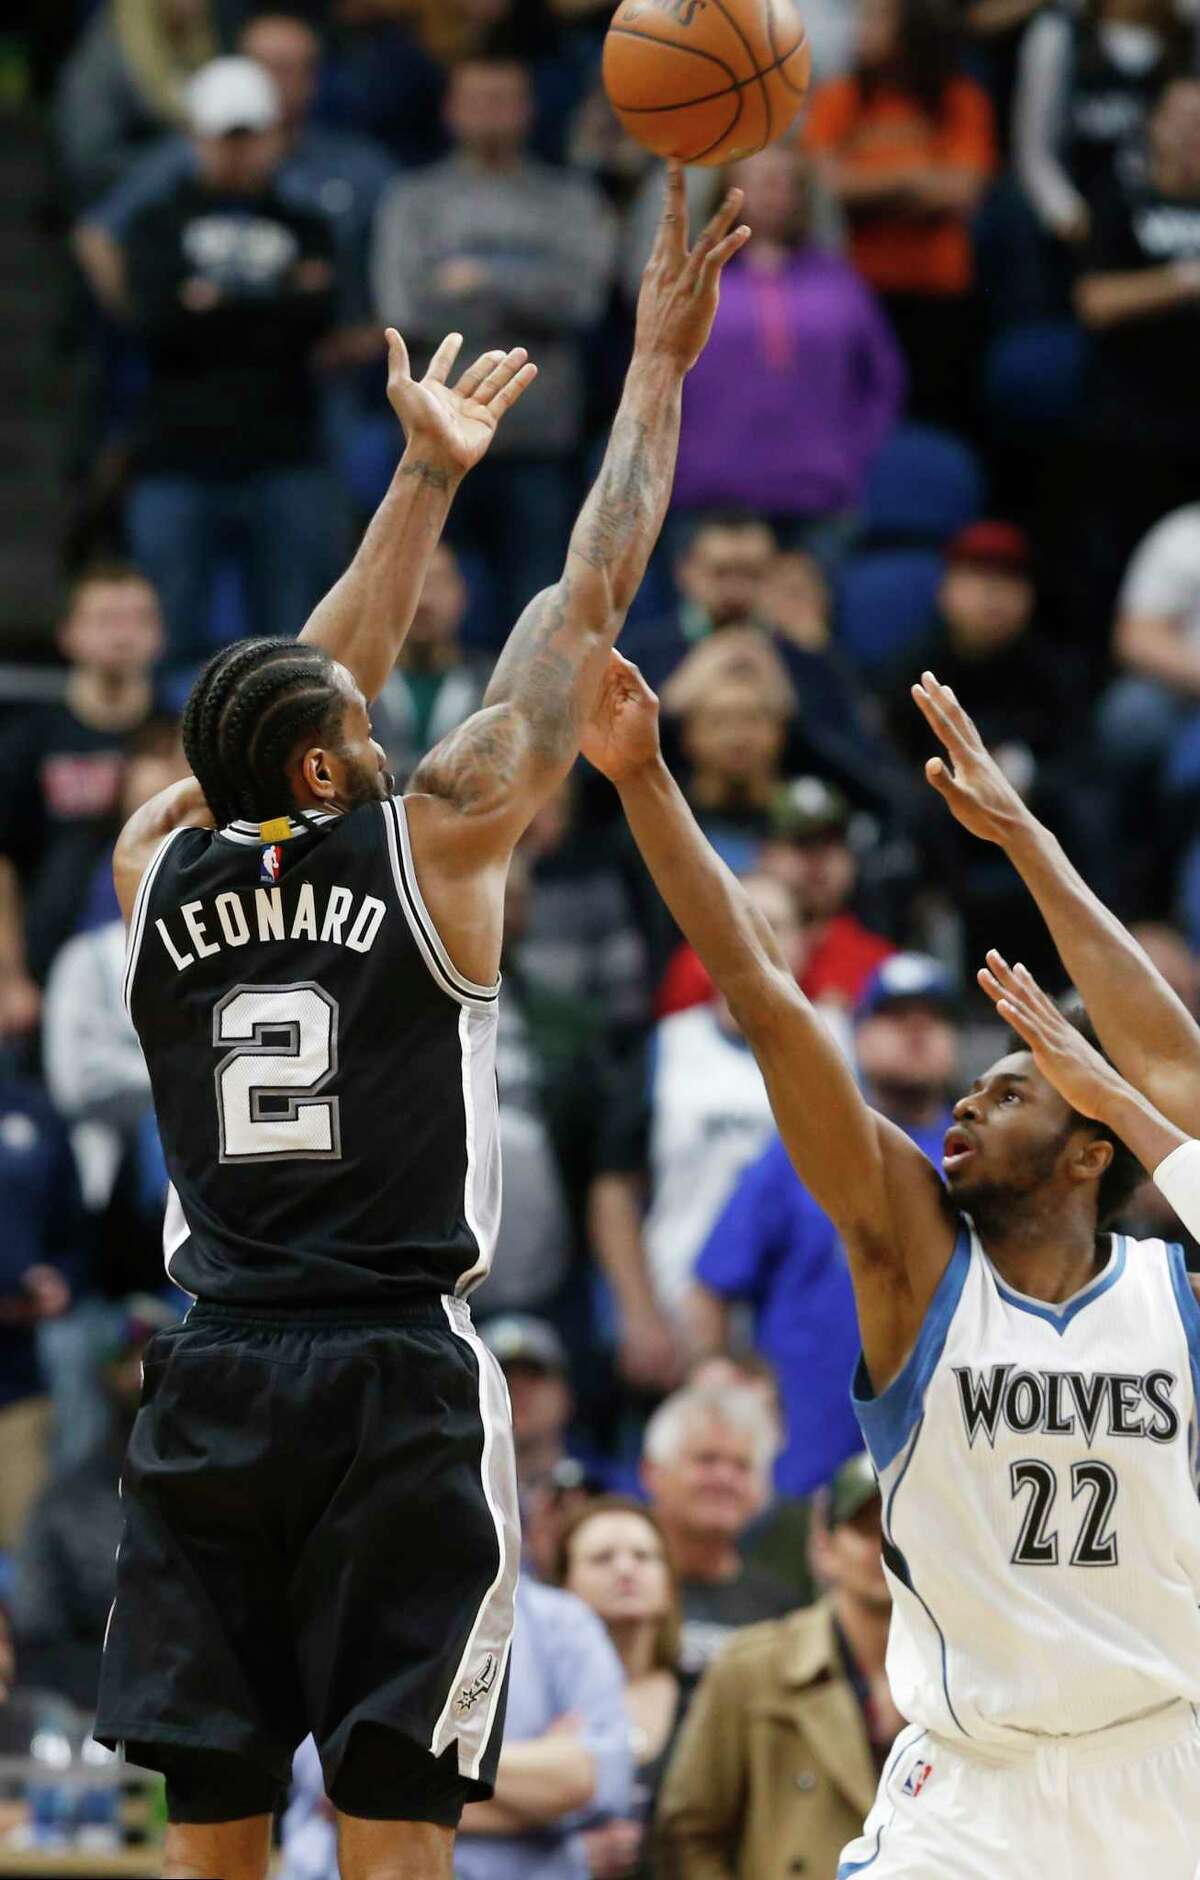 San Antonio Spurs' Kawhi Leonard shoots over Minnesota Timberwolves' Andrew Wiggins, right, during the second half of an NBA basketball game Tuesday, March 21, 2017, in Minneapolis. The Spurs won 100-93. Both Wiggins and Kawhi scored 22 points. (AP Photo/Jim Mone)